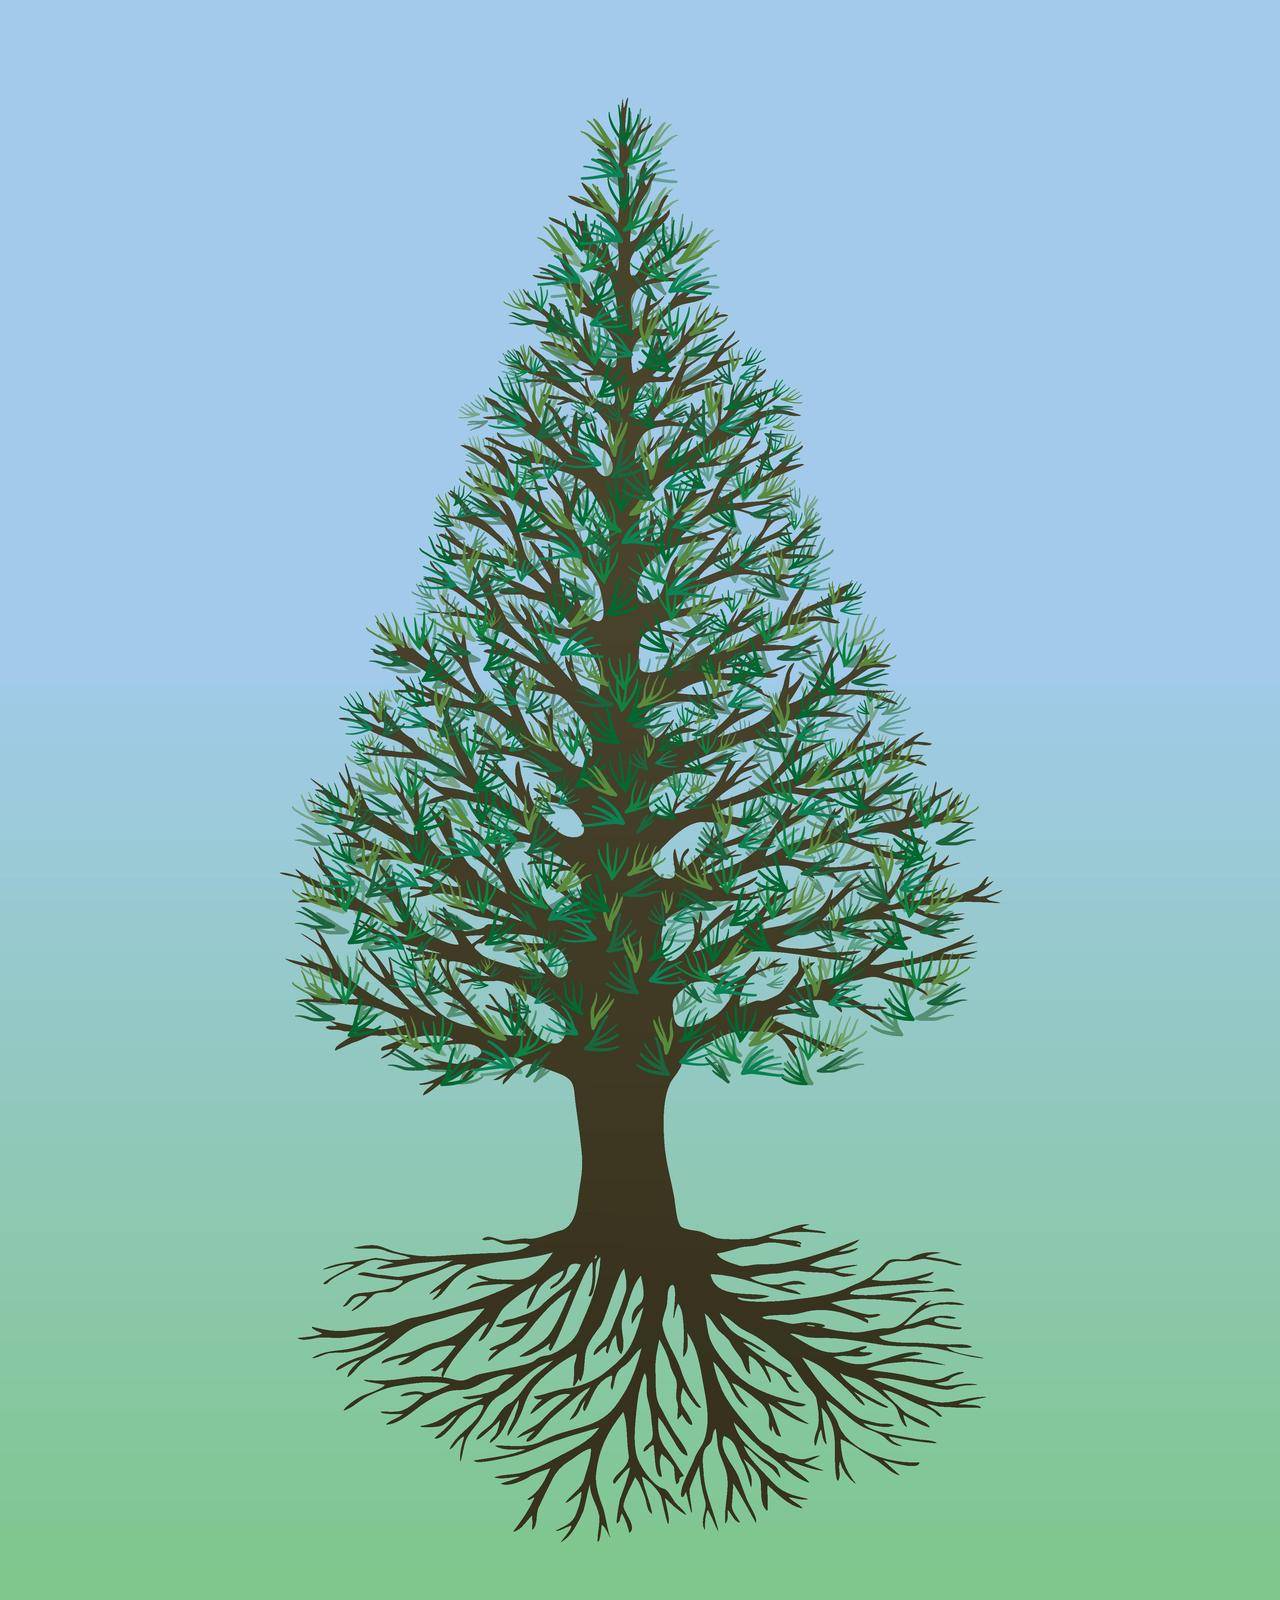 Tree of life with pine needles pointed shape by Bwise